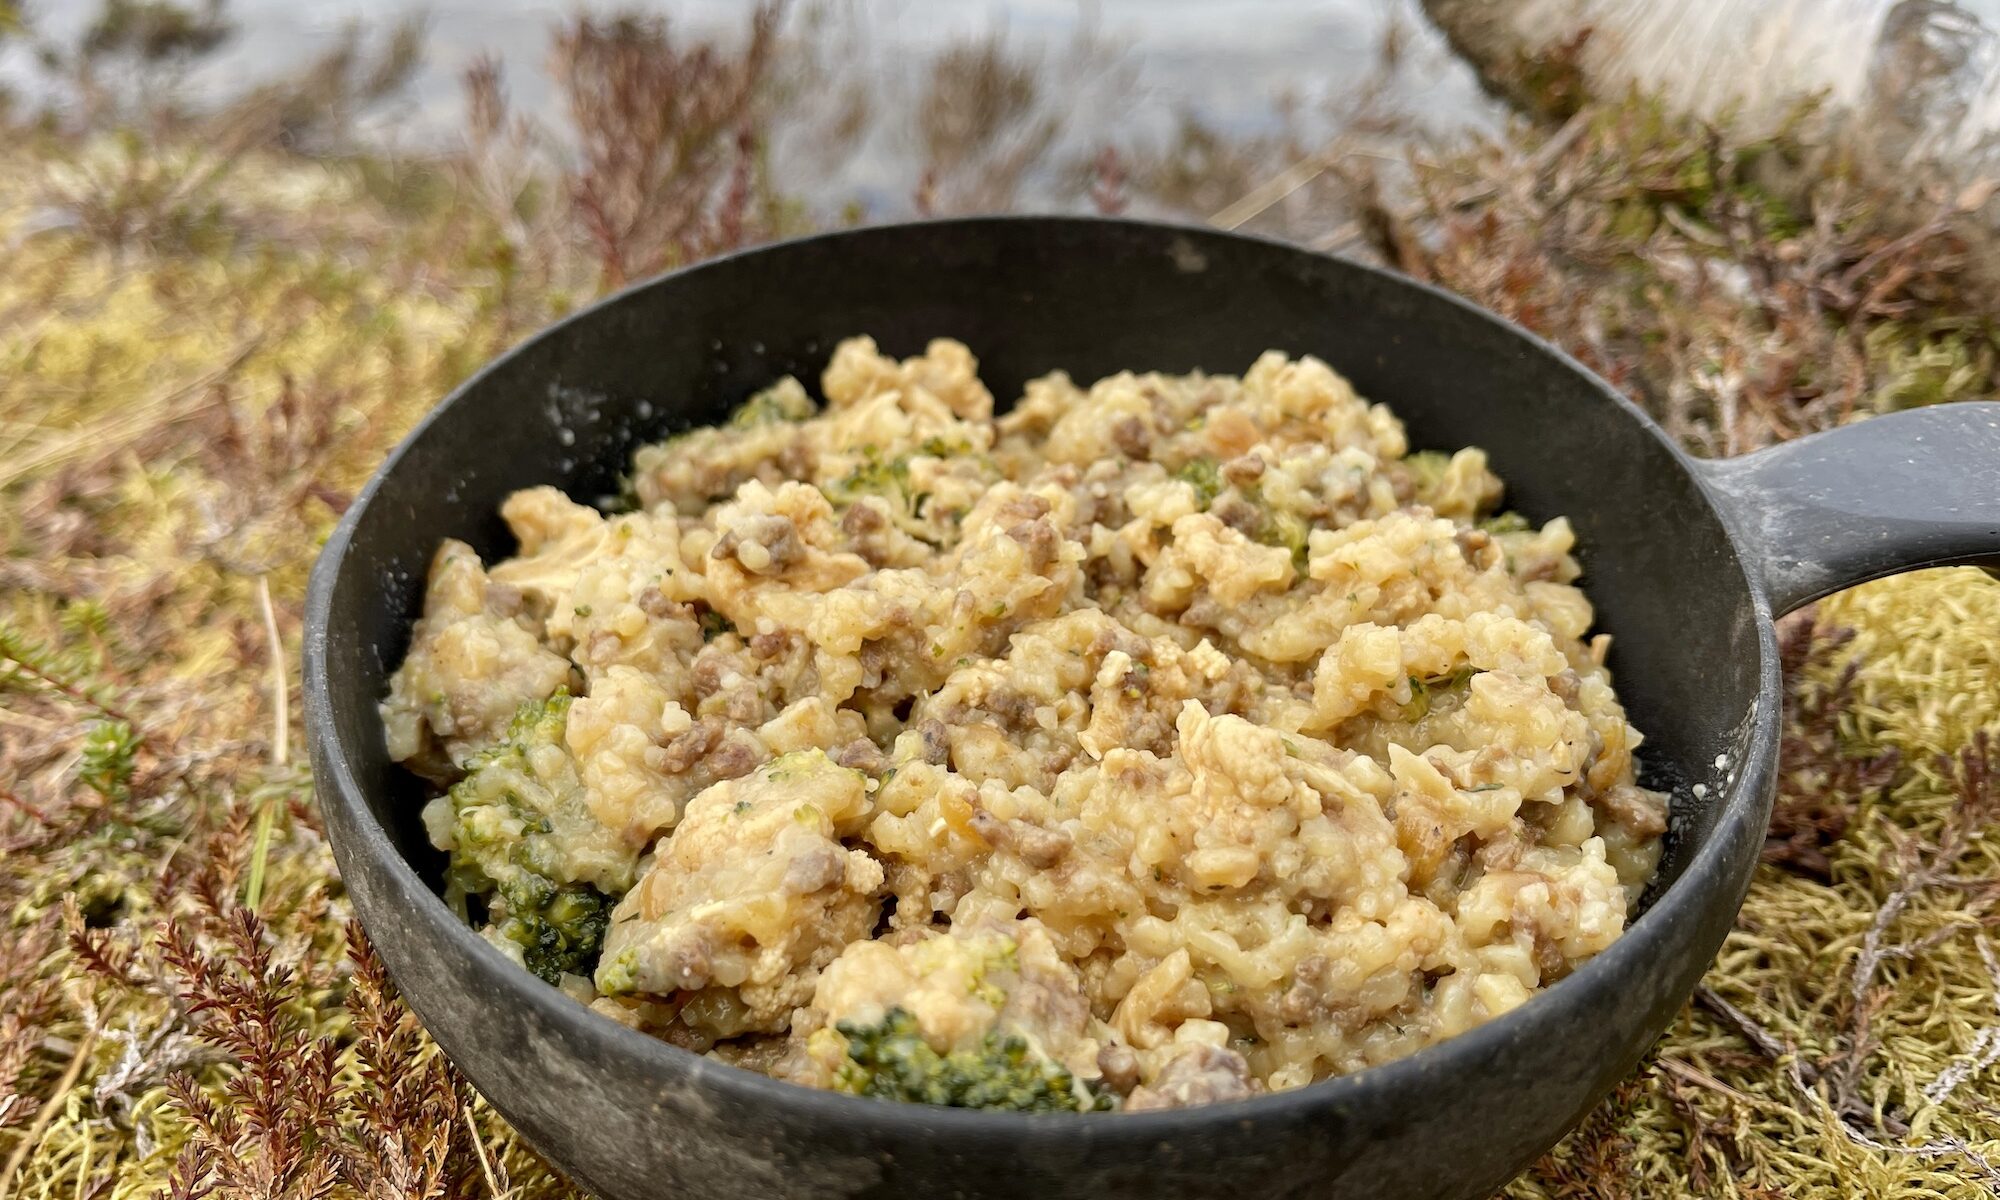 Mashed potatoes with broccoli, cauliflower and ground beef